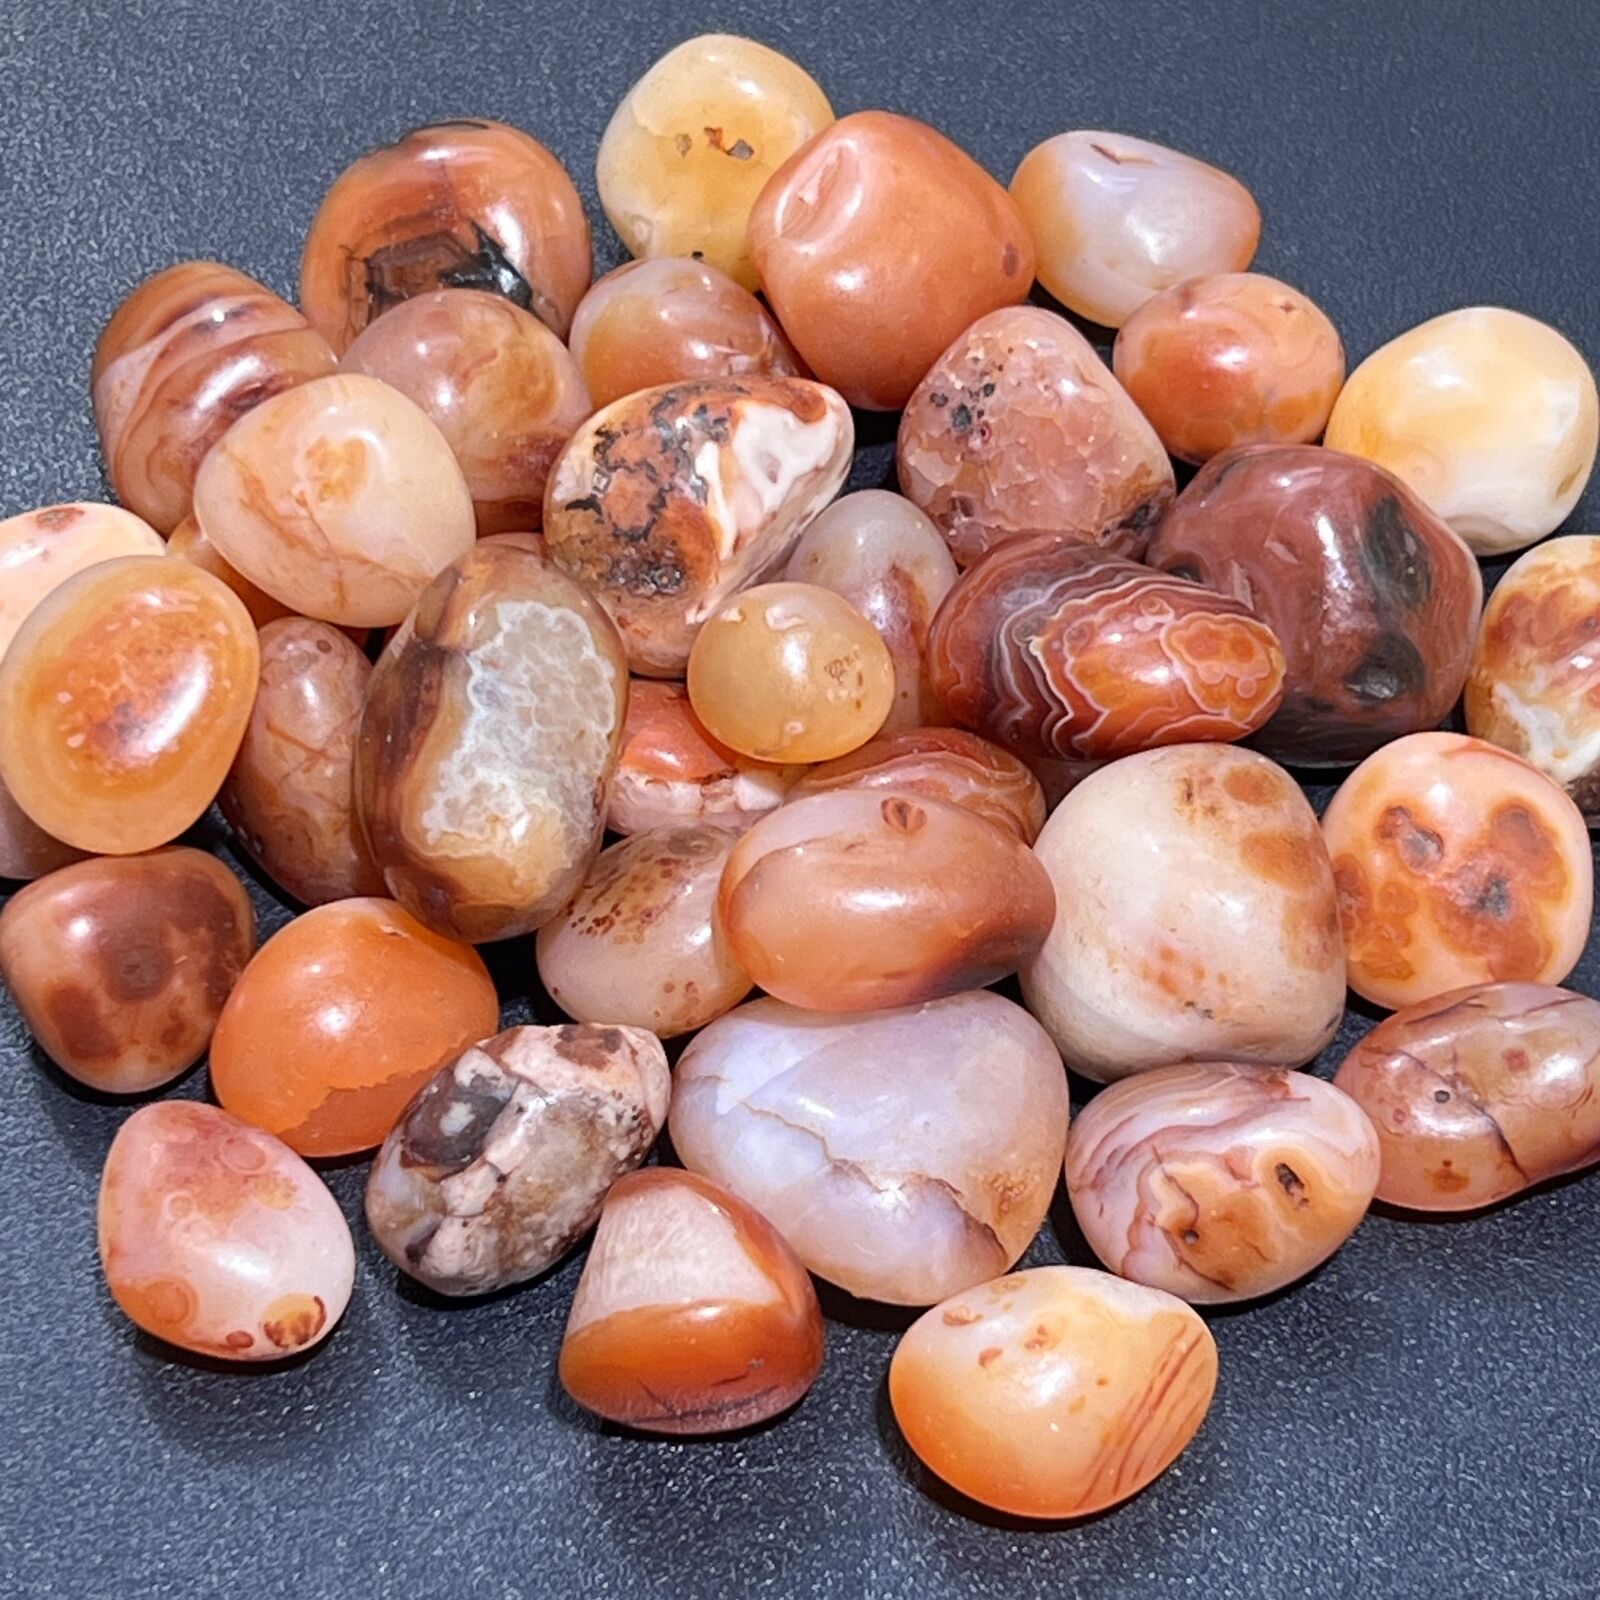 Carnelian Red Agate Tumbled (1 LB) One Pound Bulk Wholesale Lot Polished Natural